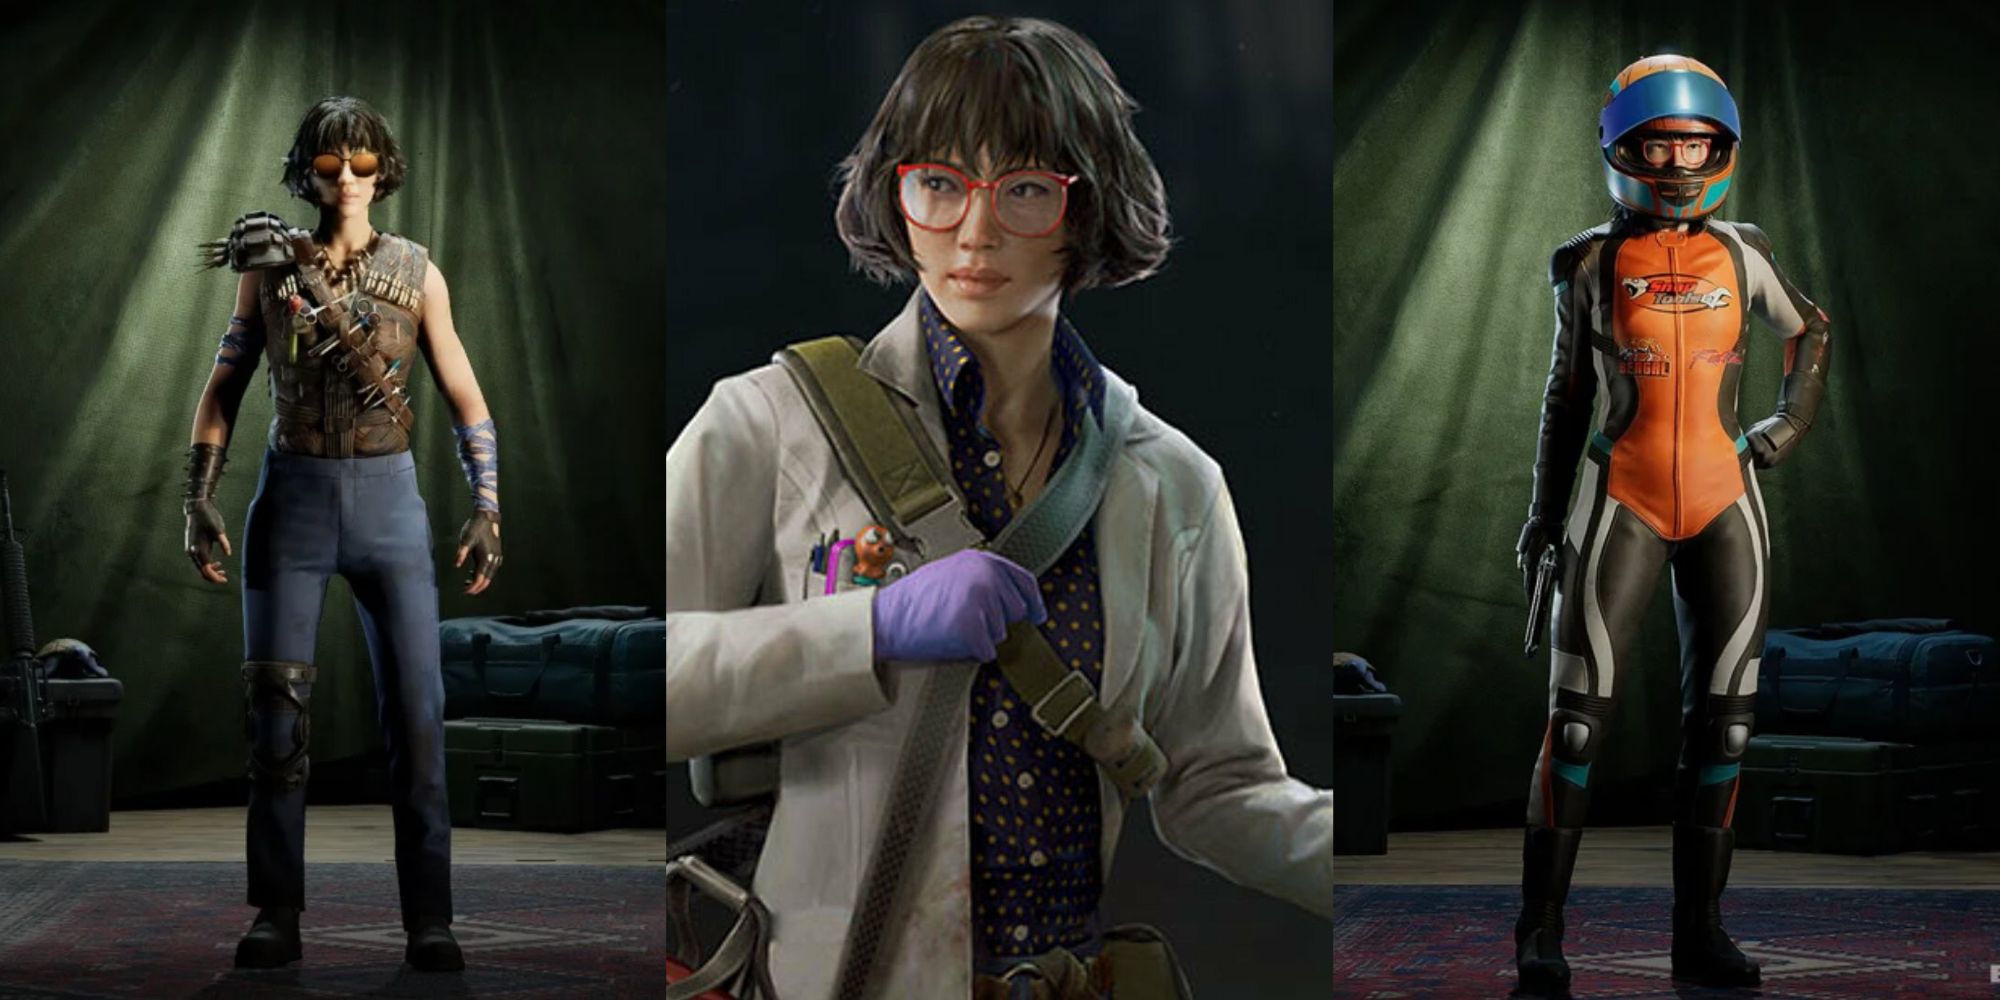 Doc Back 4 Blood in the Total Apocaplyse outfit, default outfit, and Fuel Injected outfit.